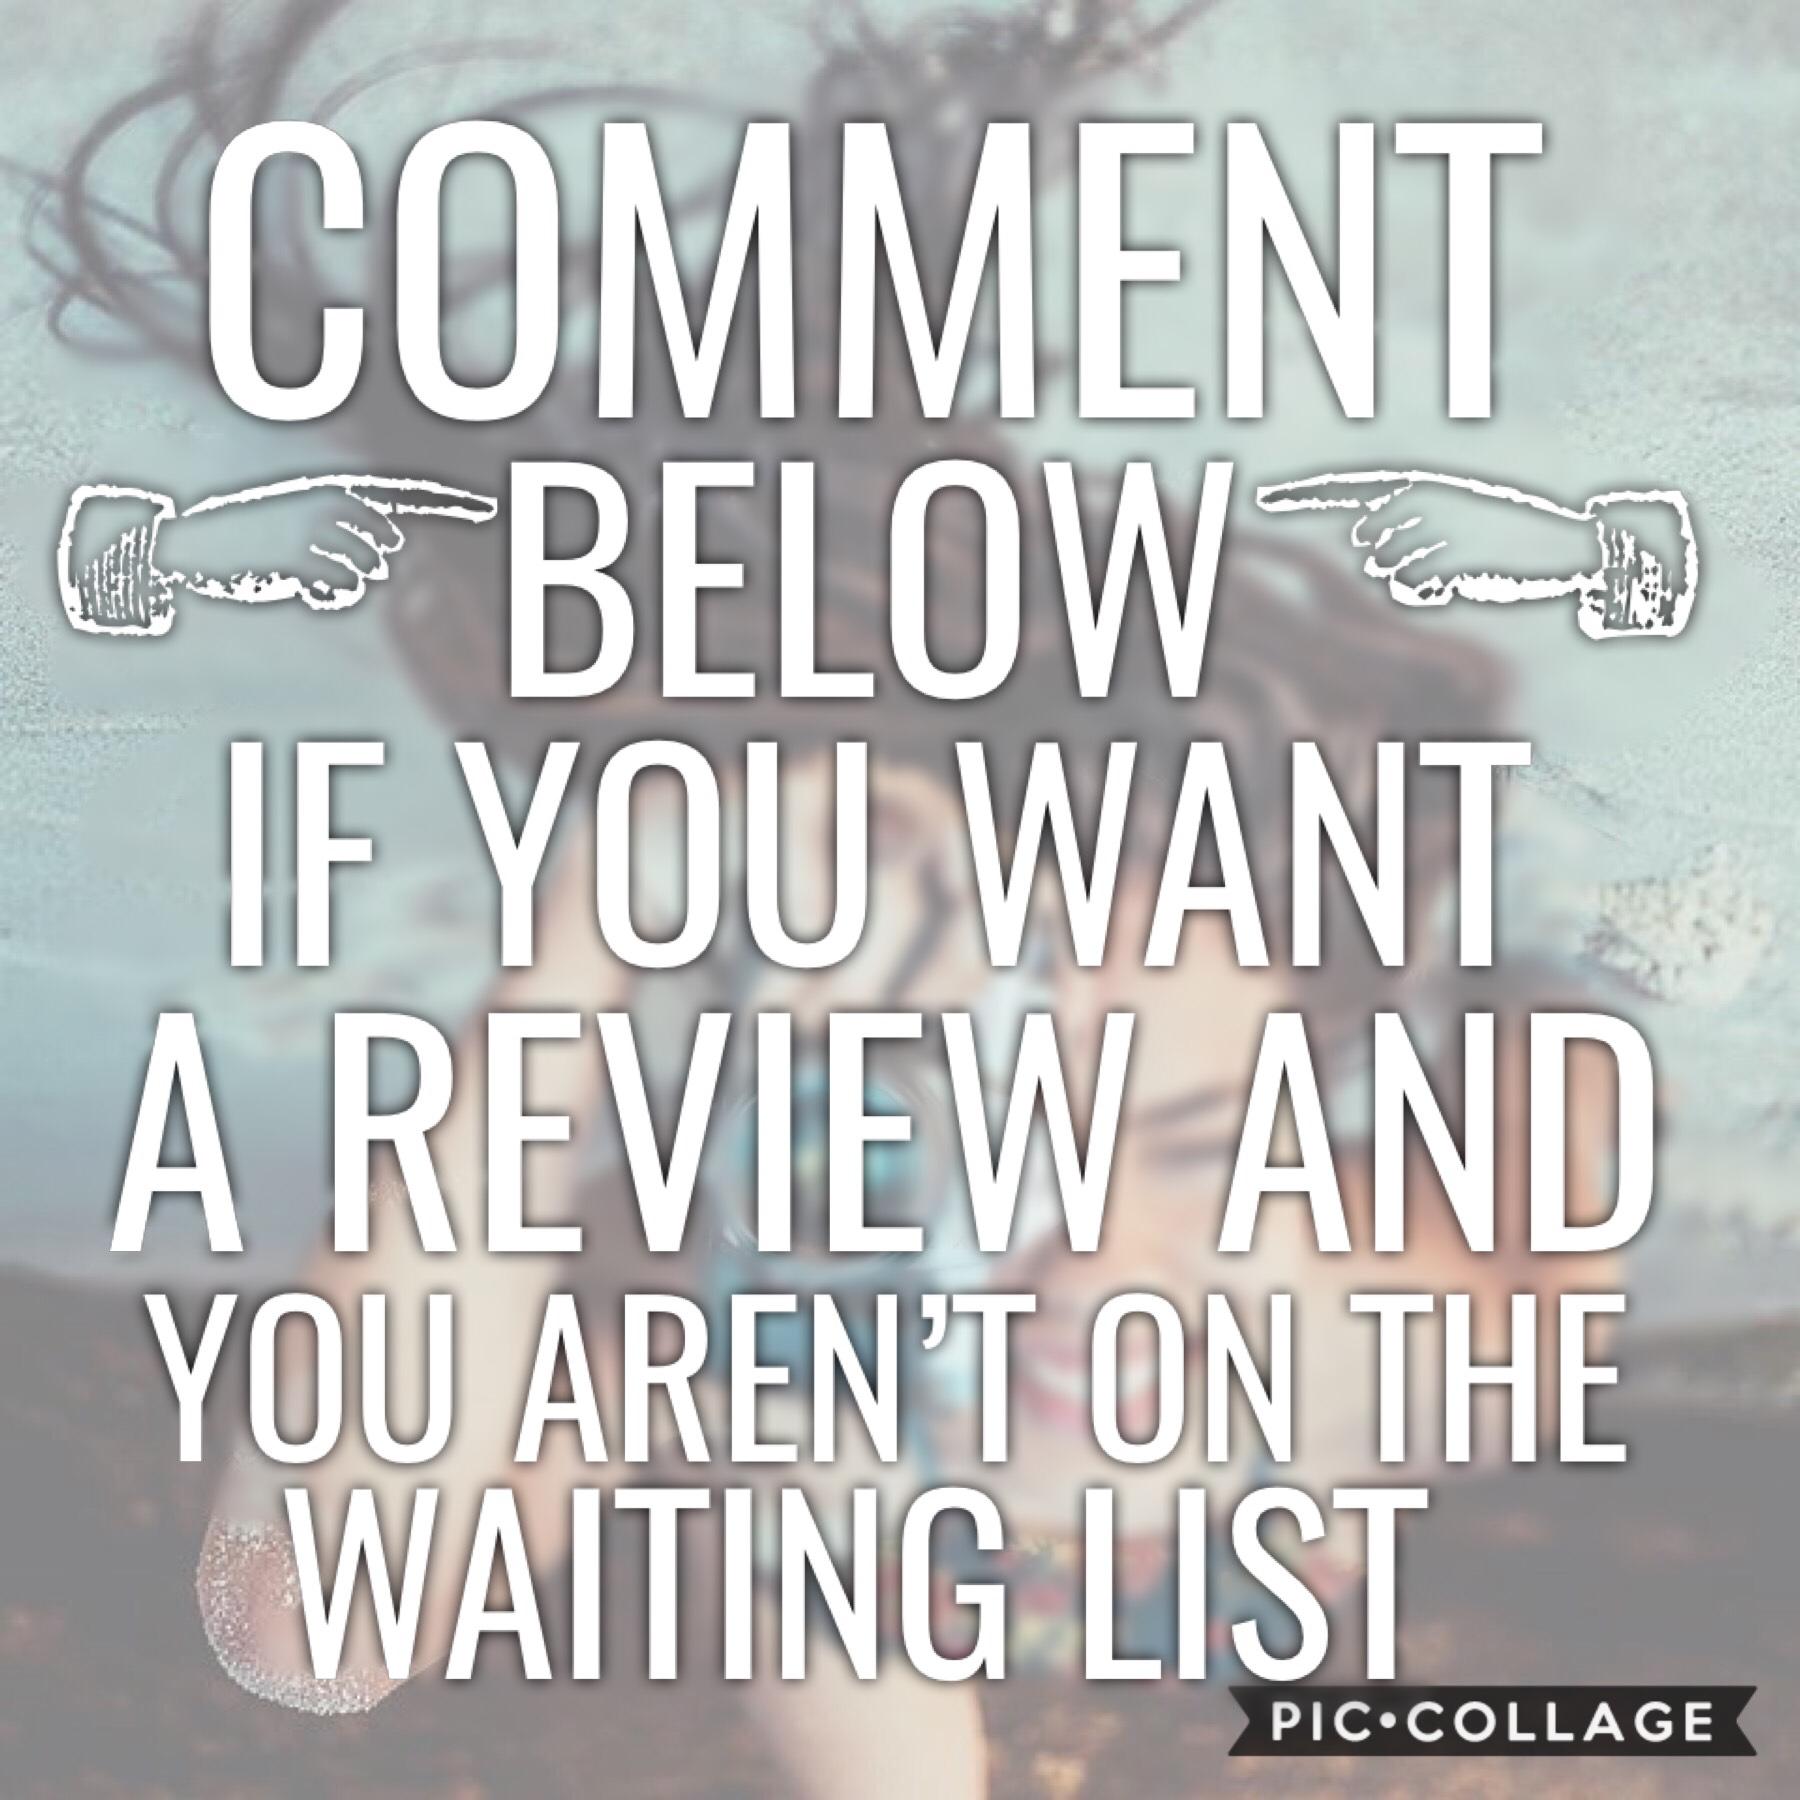 Collage by _stardust_reviews